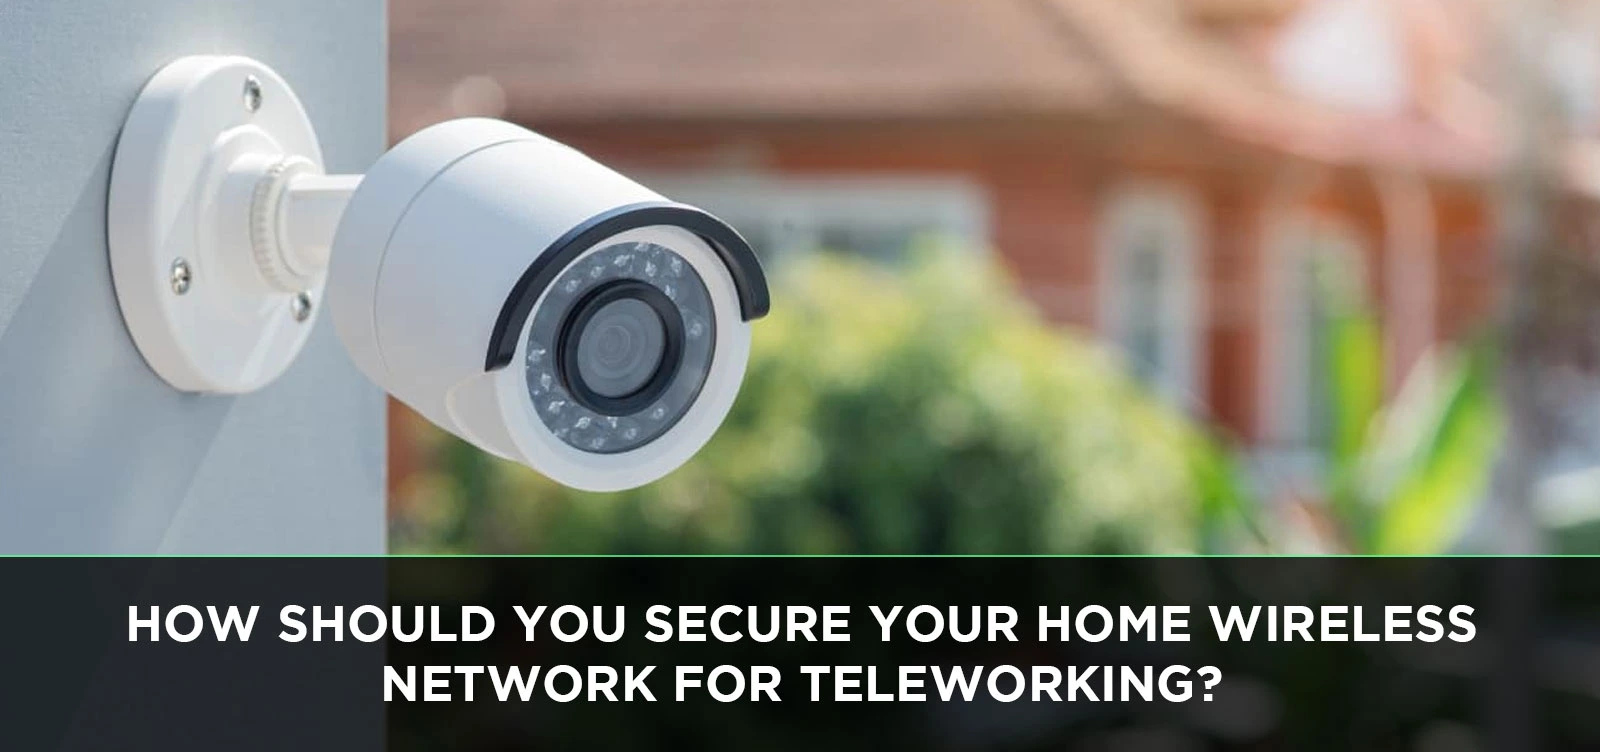 How should you secure your home wireless network